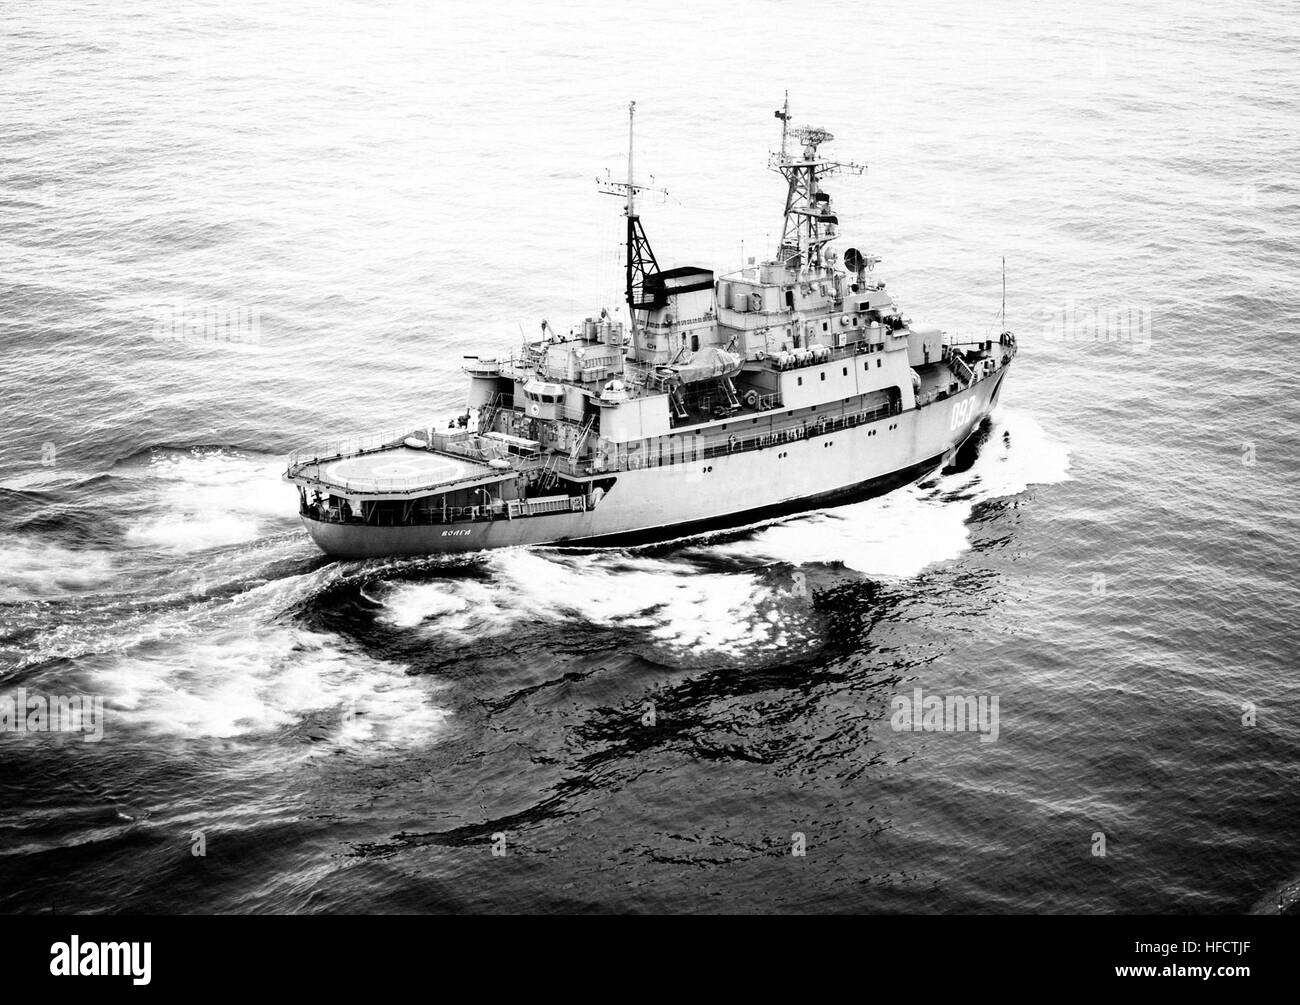 A starboard quarter view of the Soviet Ivan Susanin class patrol icebreaker VOLGA en route to San Francisco to take part in the United States Coast Guard's 200th anniversary celebration.  The ship is operated by the KGB Maritime Border Guard. PSKR-Volga(DN-SN-91-00620) Stock Photo